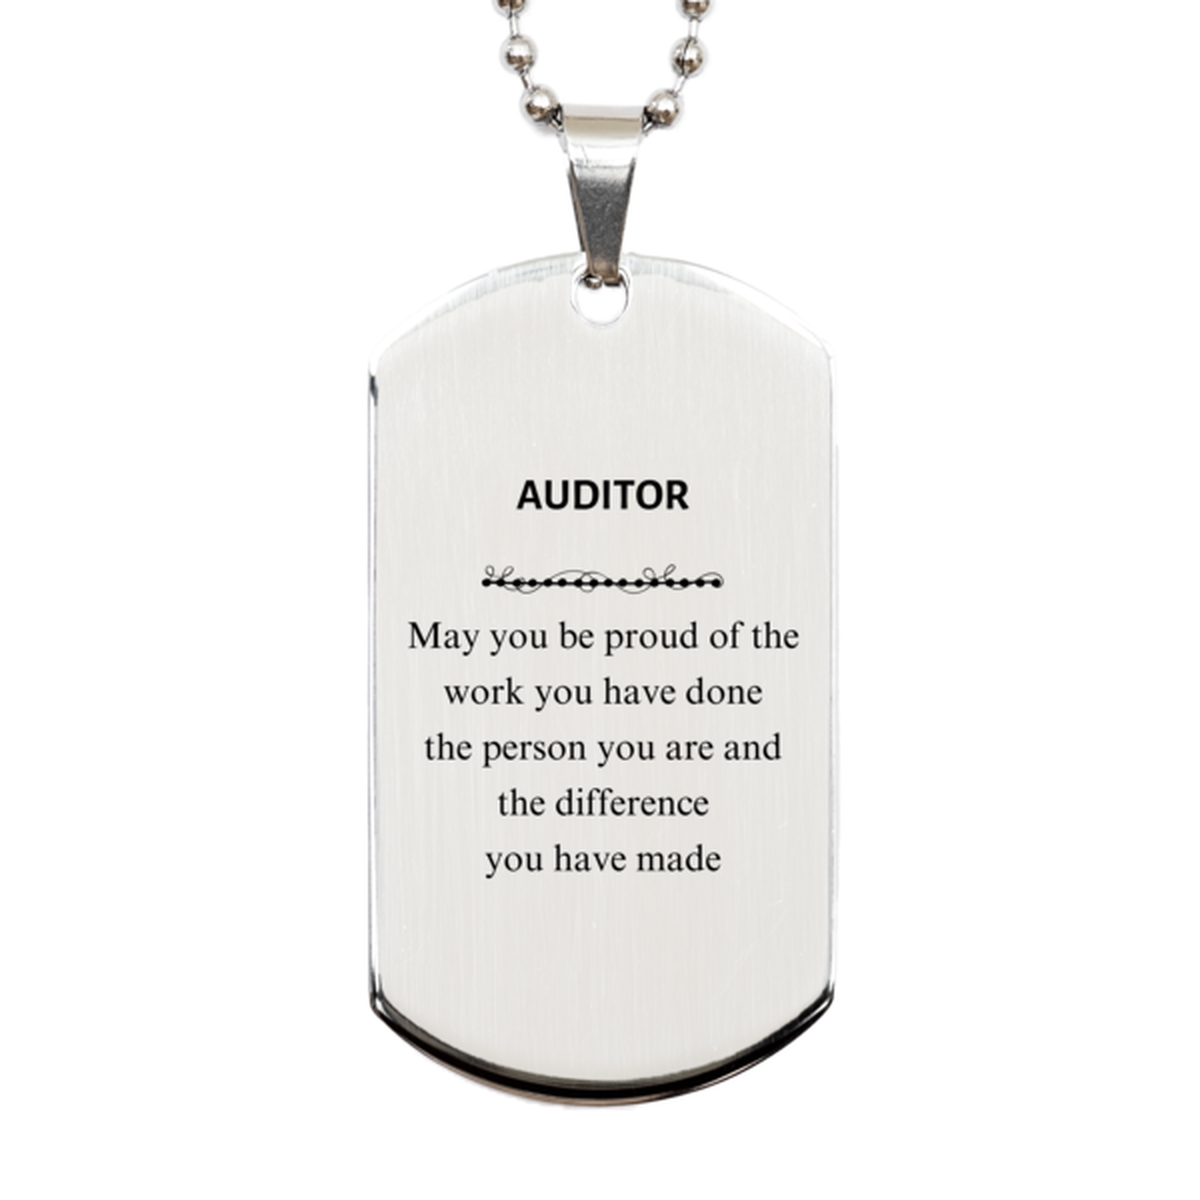 Auditor May you be proud of the work you have done, Retirement Auditor Silver Dog Tag for Colleague Appreciation Gifts Amazing for Auditor